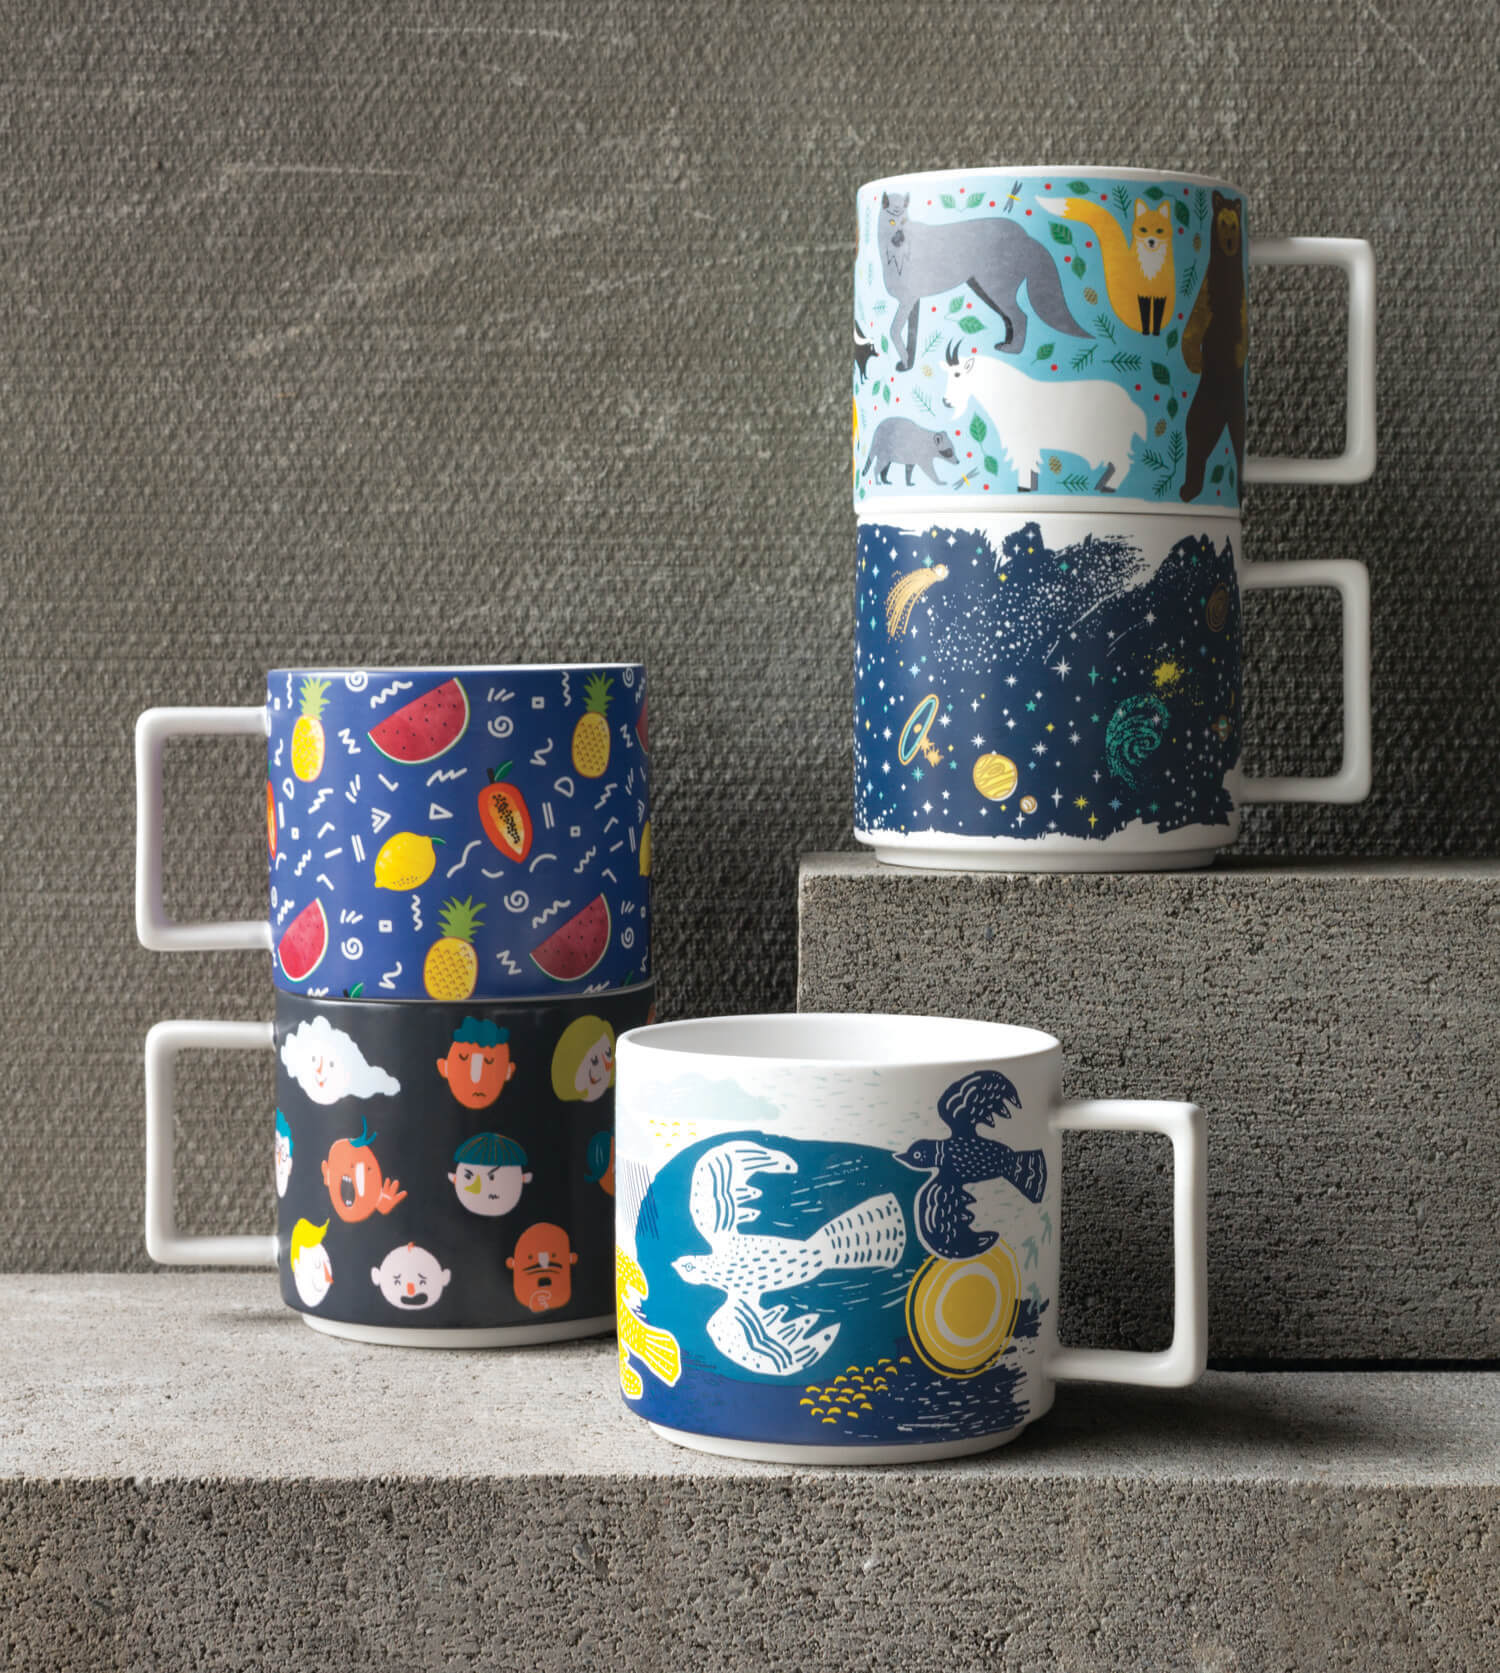 You can easily create your designs on mugs with Printful.